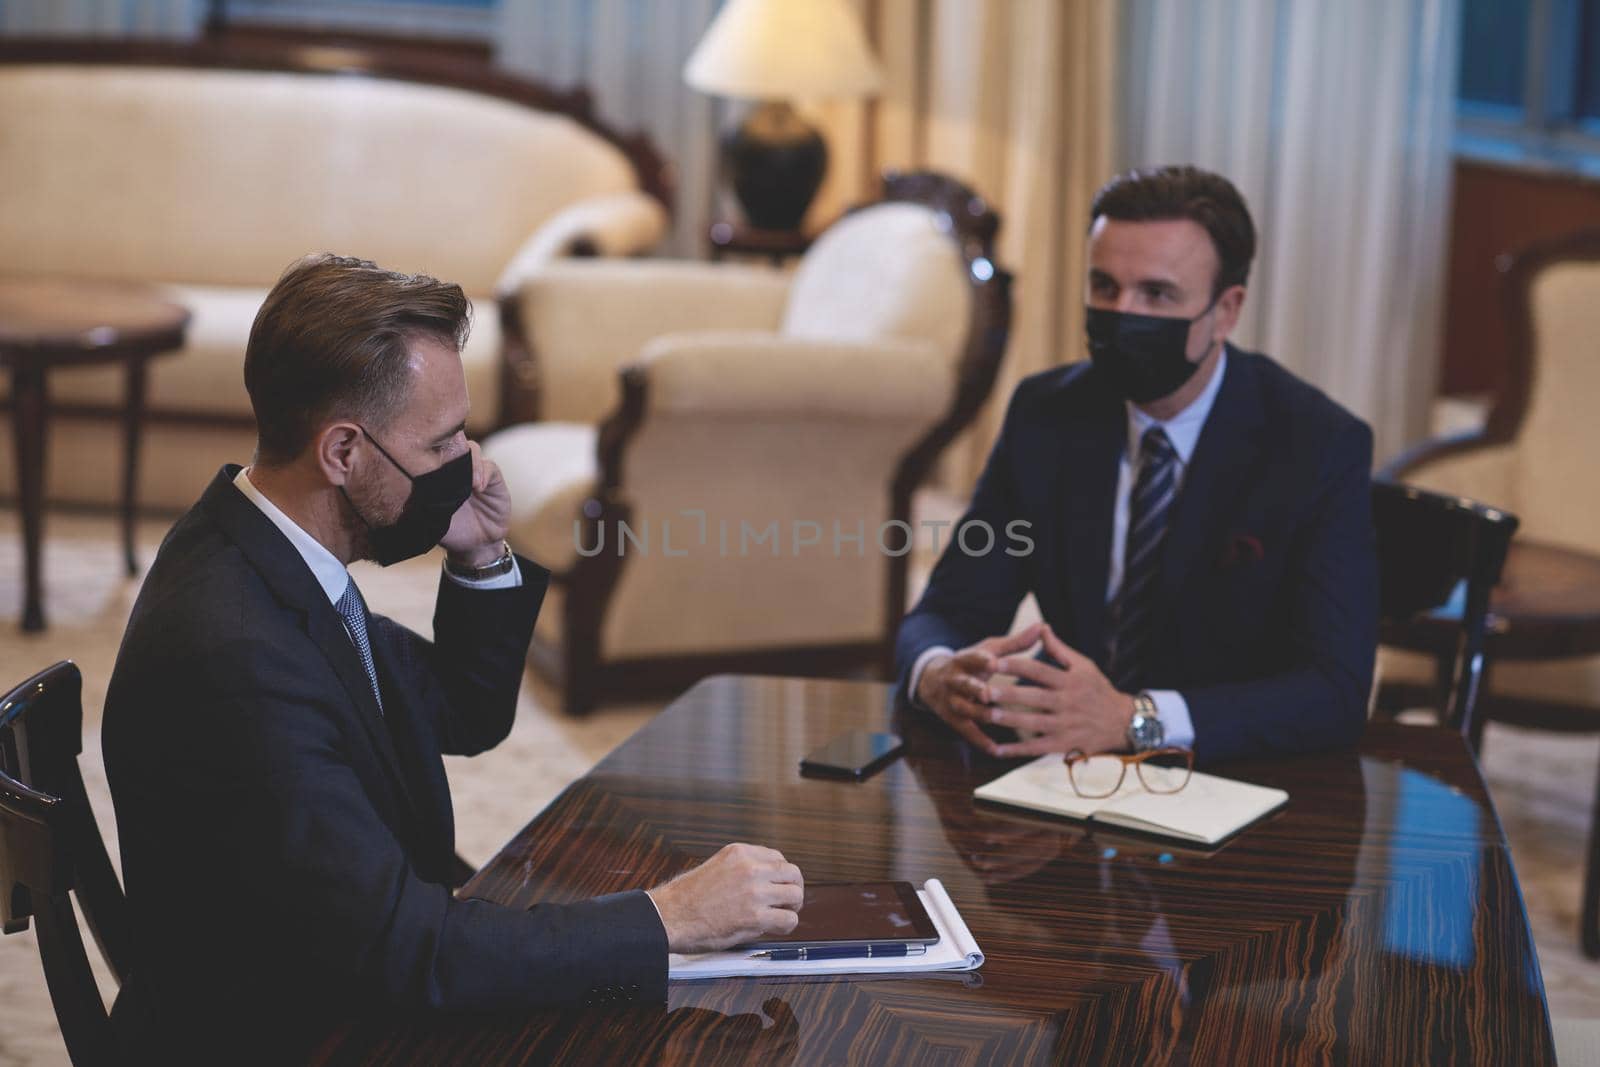 corporate business people team on meeting in luxury office  wearing crona virus protection face mask keep social distance